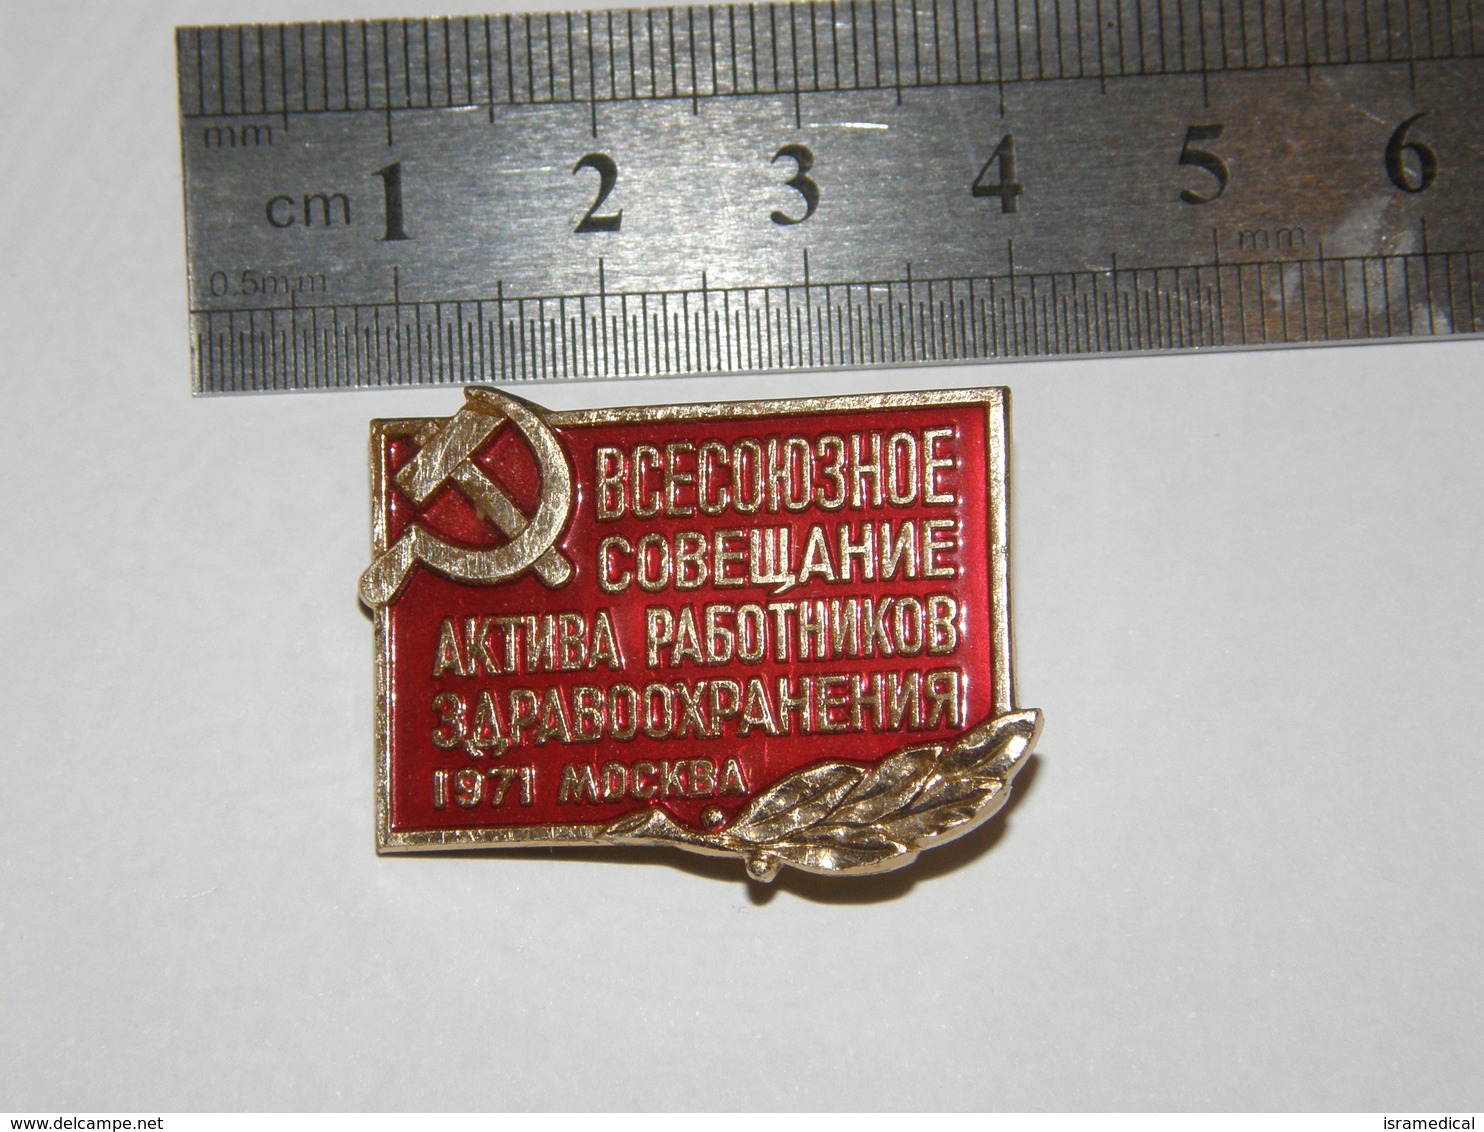 USSR 1971 ALL-UNION MEETING HEALTH WORKERS ASSET BADGE 32 - Medici